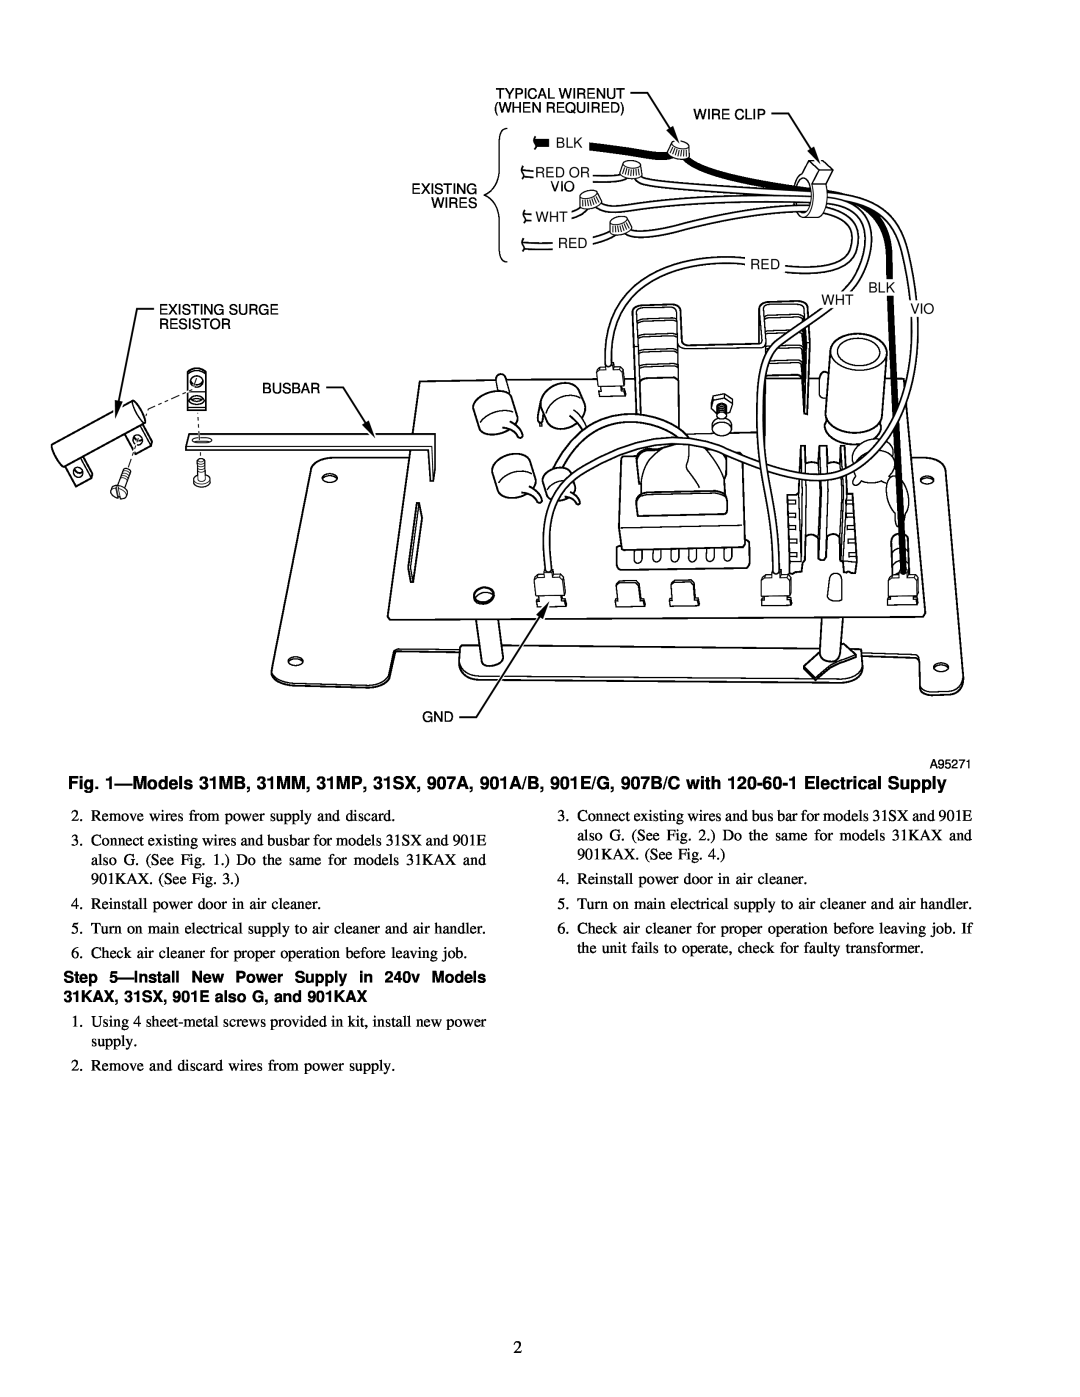 Carrier 120-60-1 installation instructions Remove wires from power supply and discard 